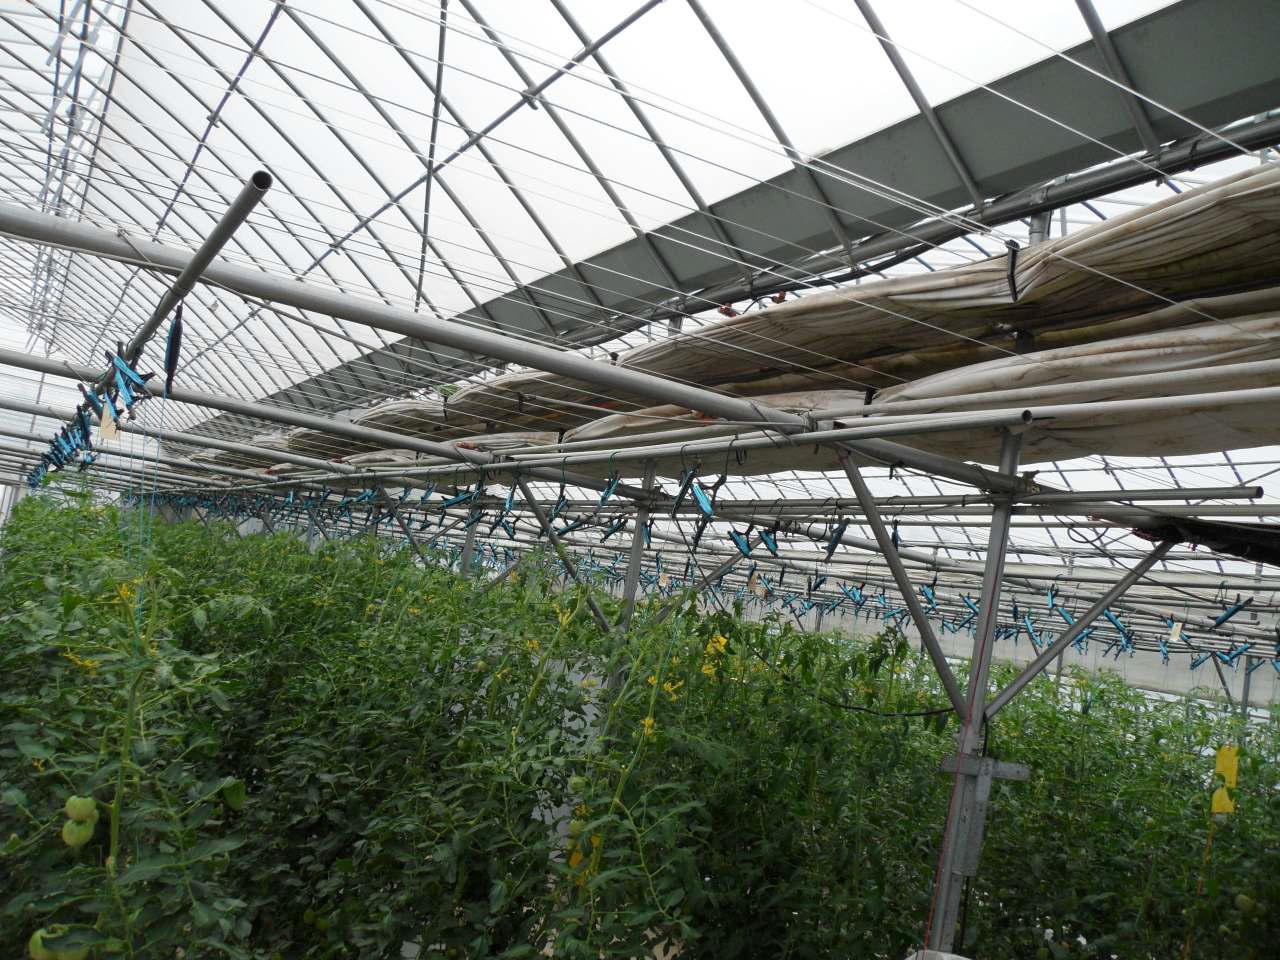 Inside view of experimental greenhouses